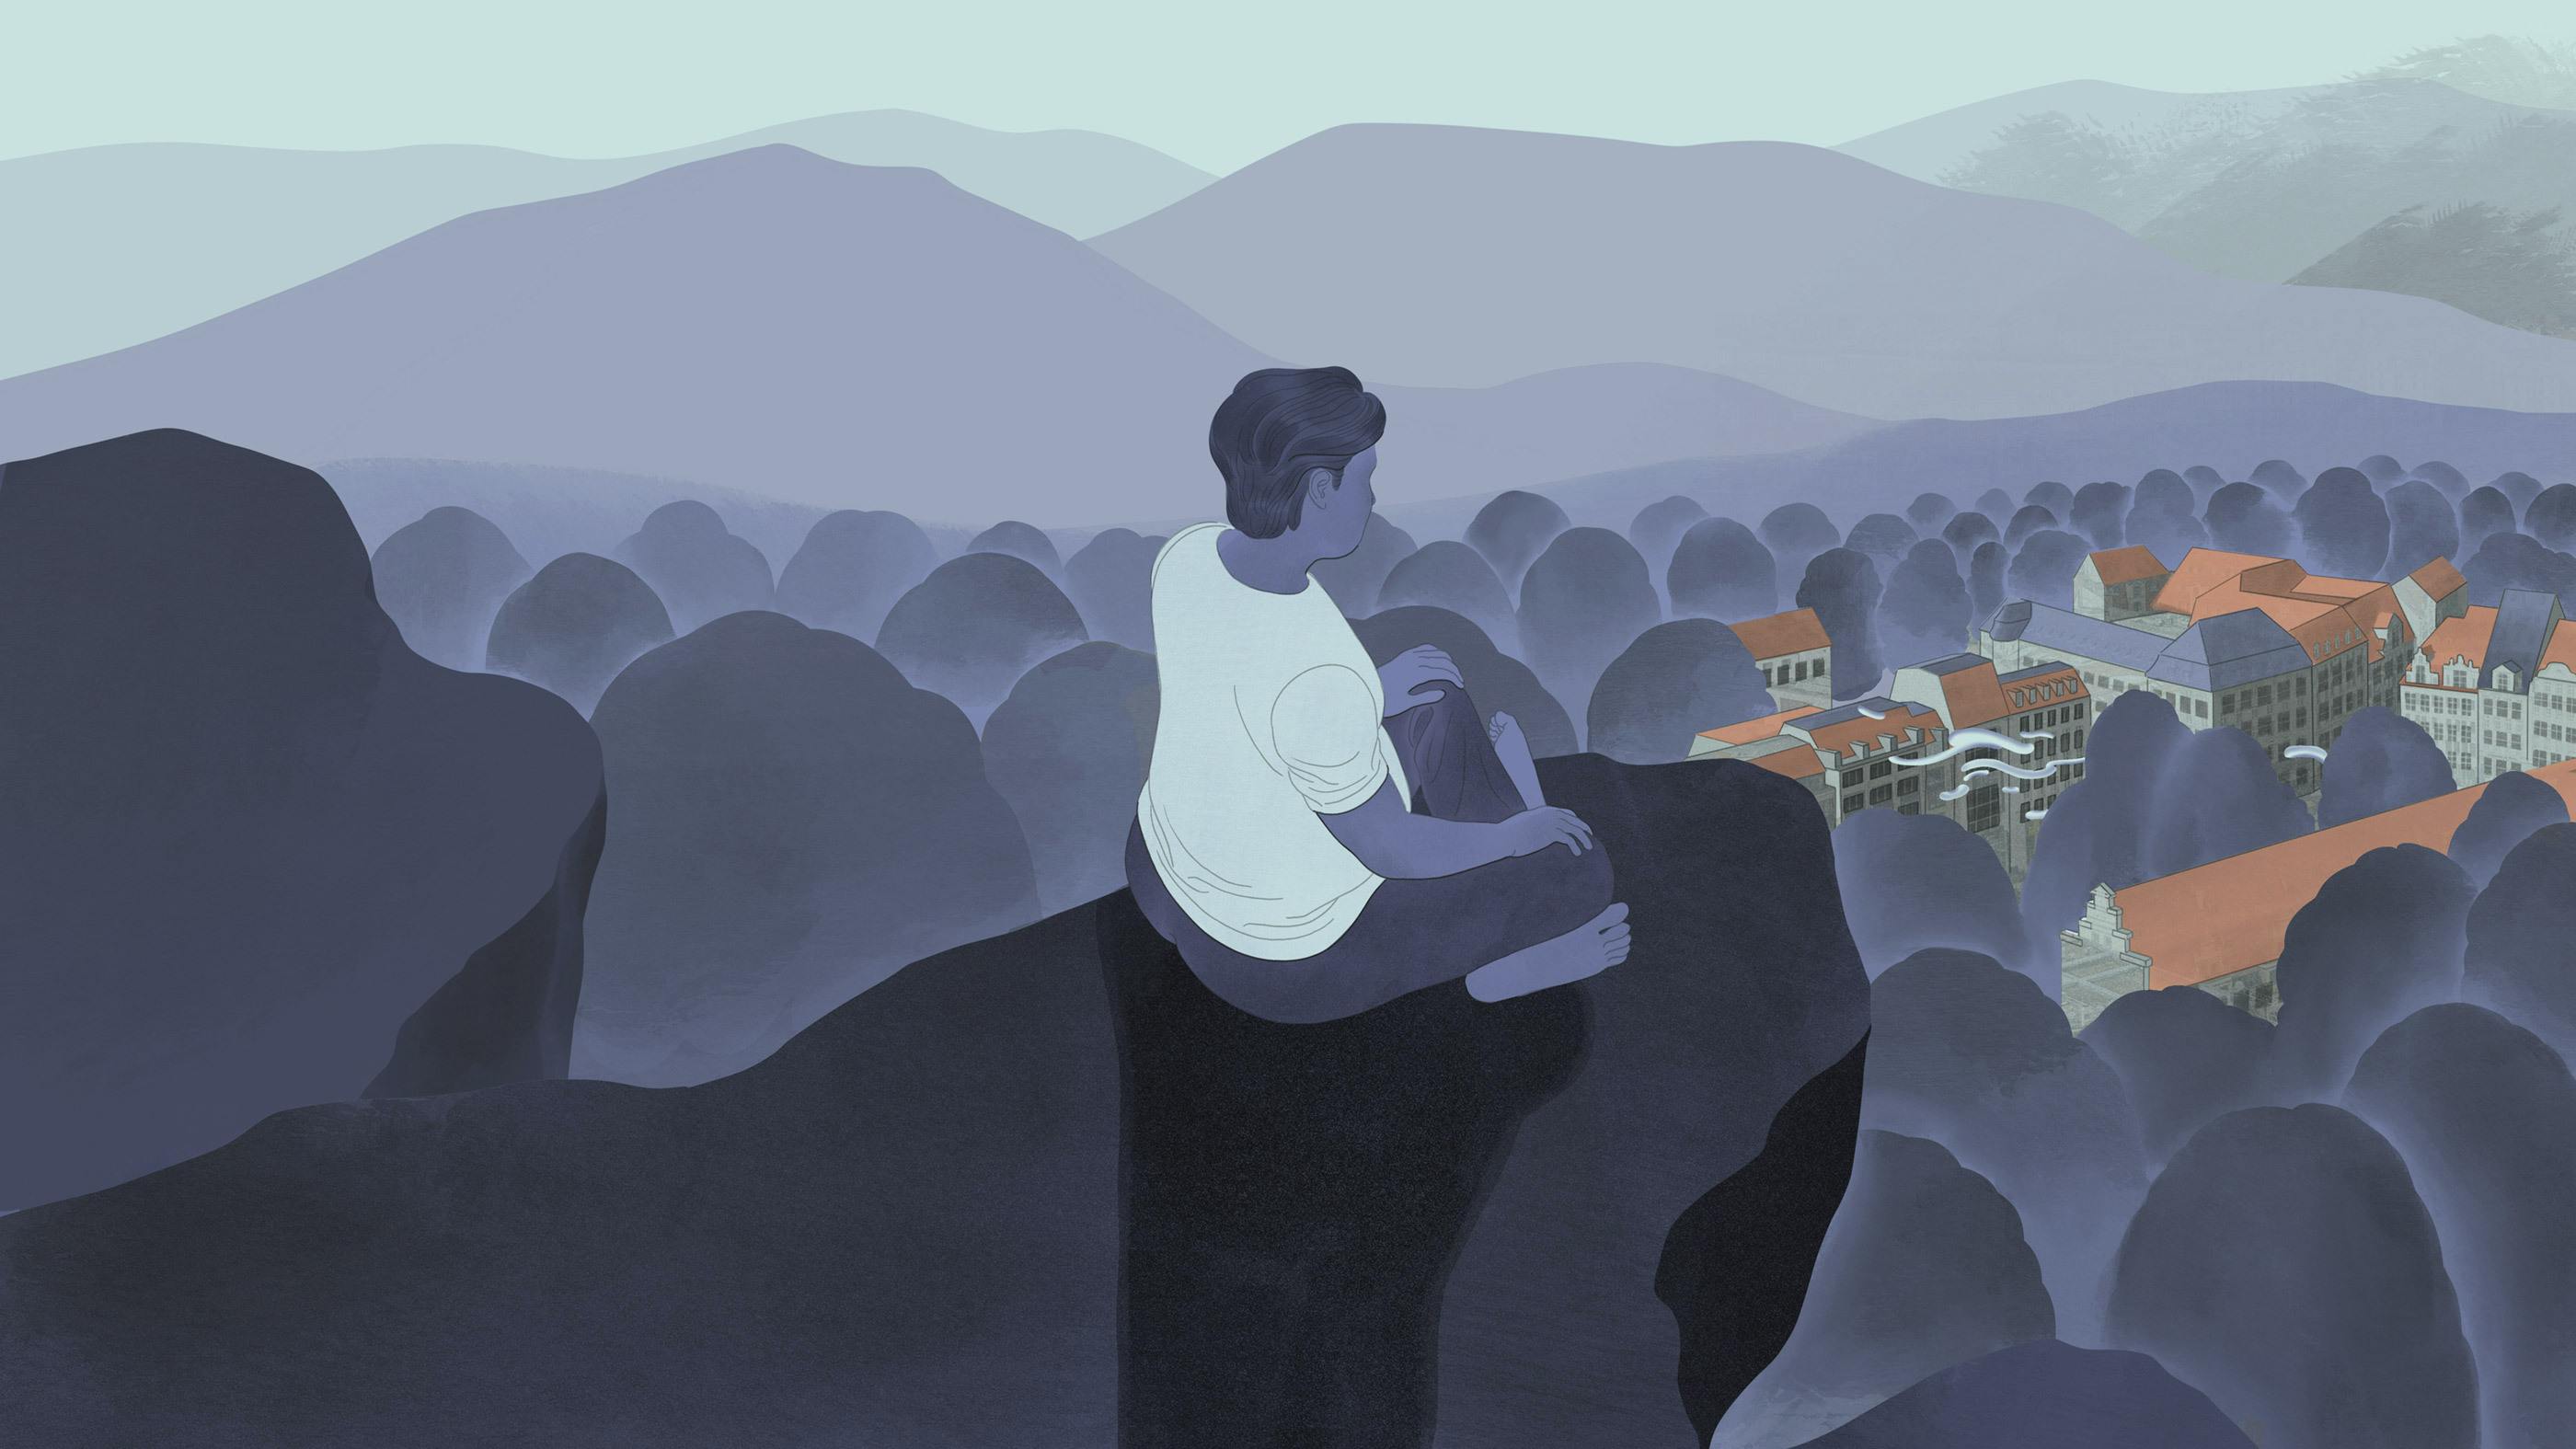 Man sitting in lotus overlooking a countryside and buildings. Illustration by Jun Cen for part 6